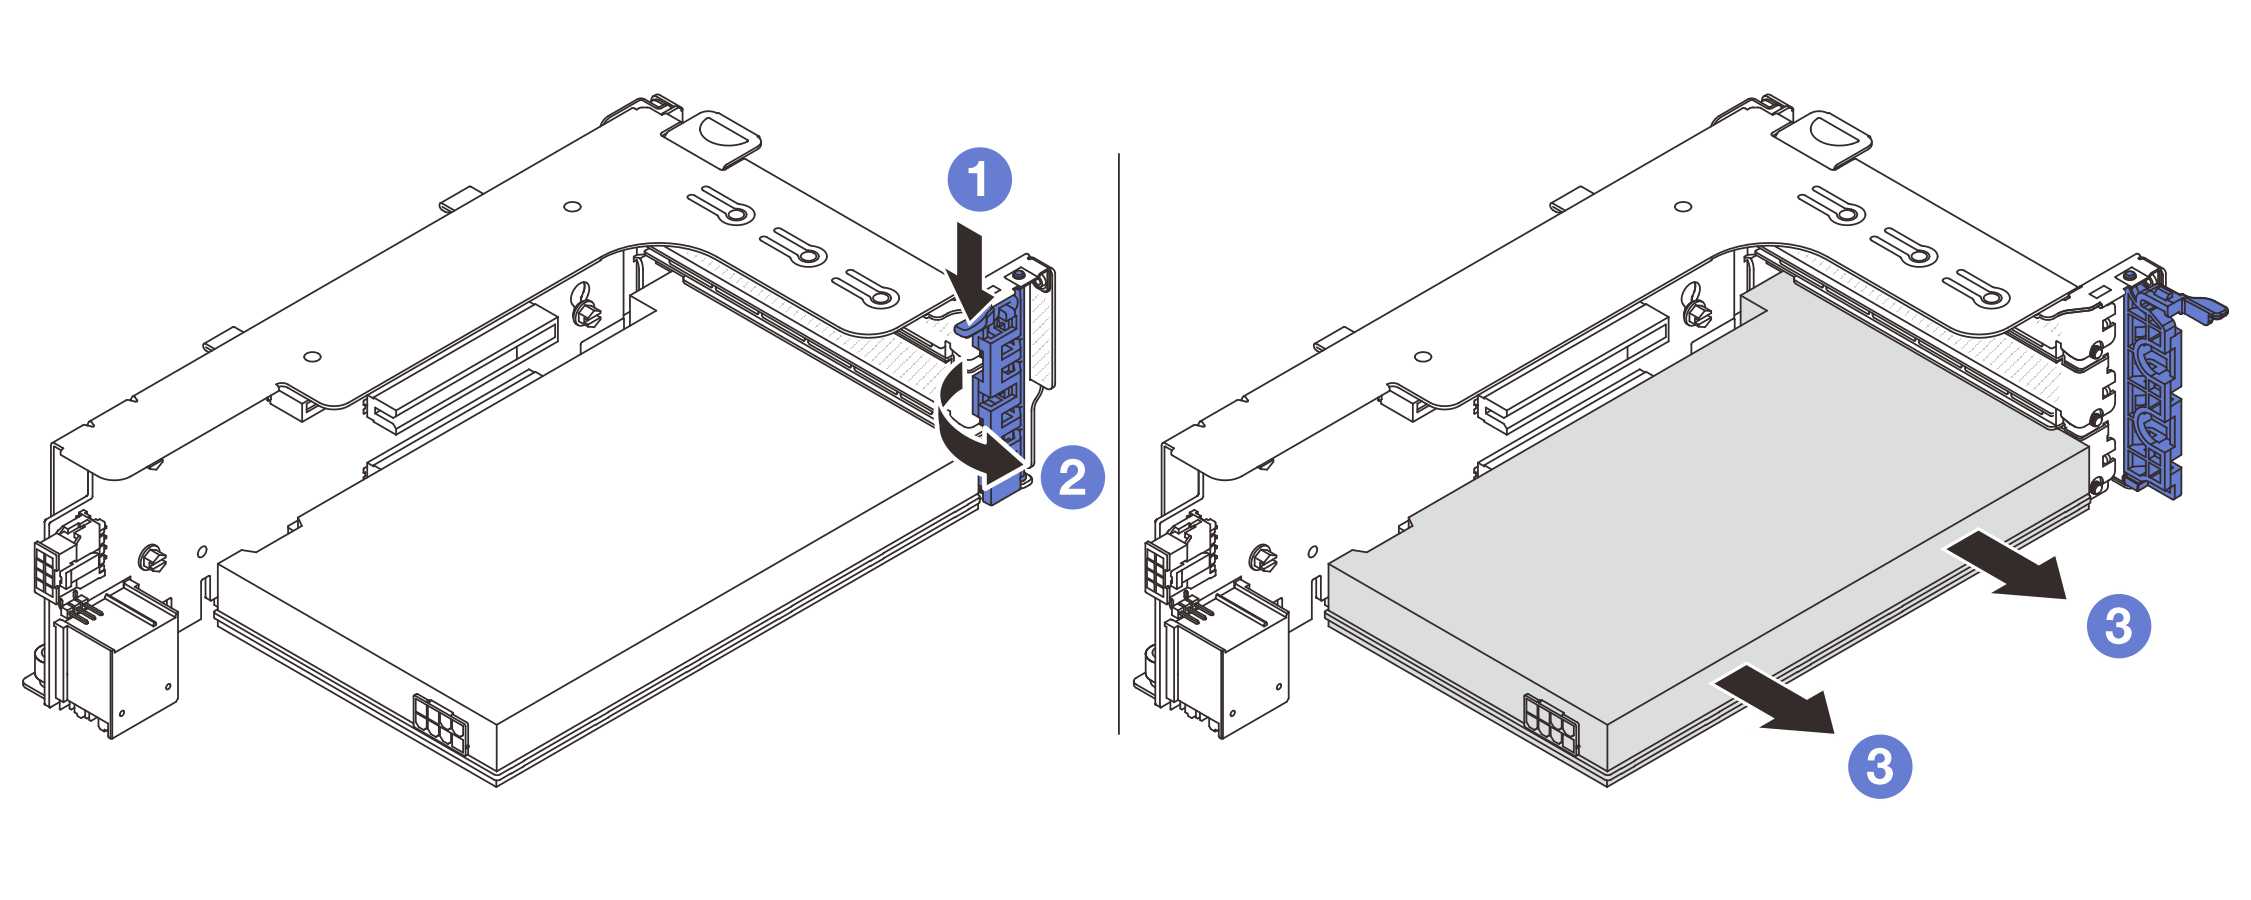 Removing the PCIe adapter from riser 1 or 2 assembly